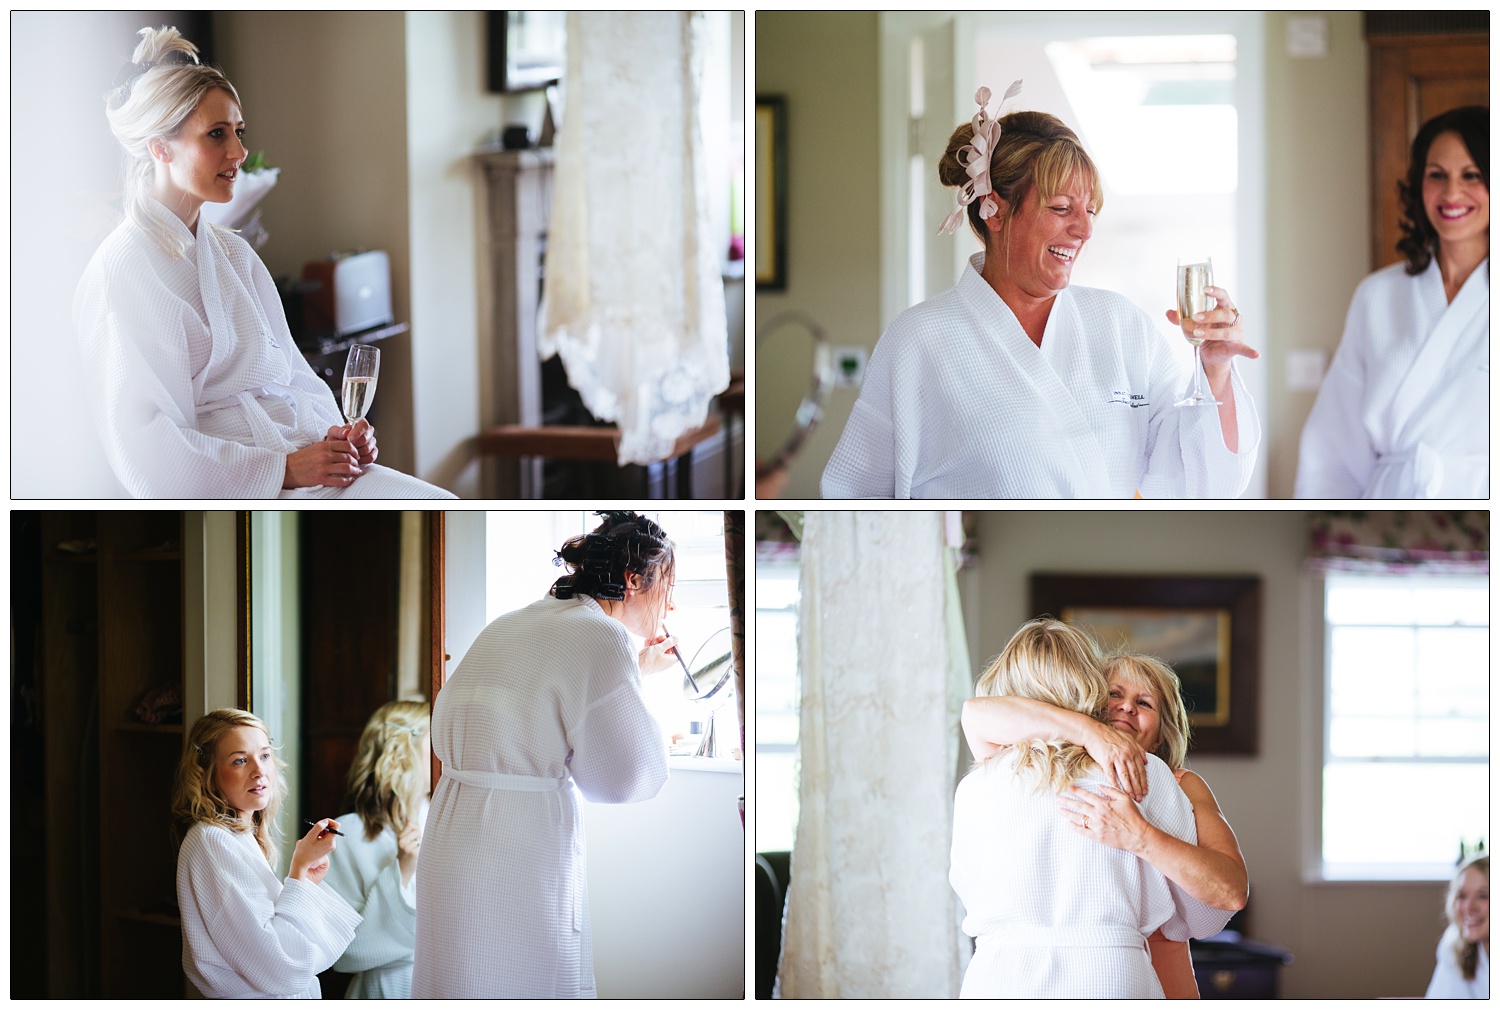 Women in dressing gowns getting ready for a wedding.